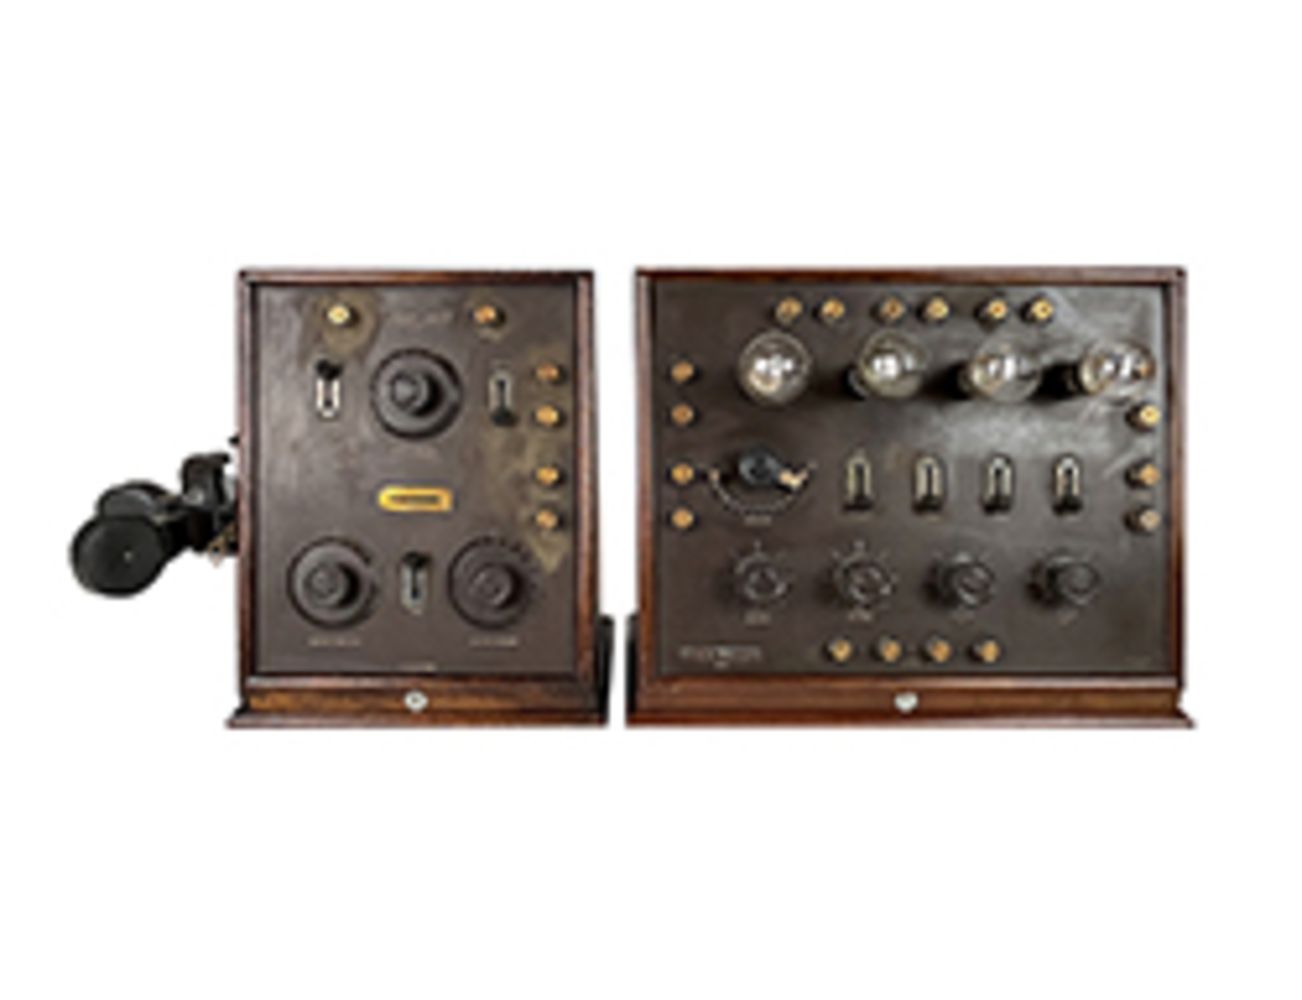 Radio's & General Collectibles Auction